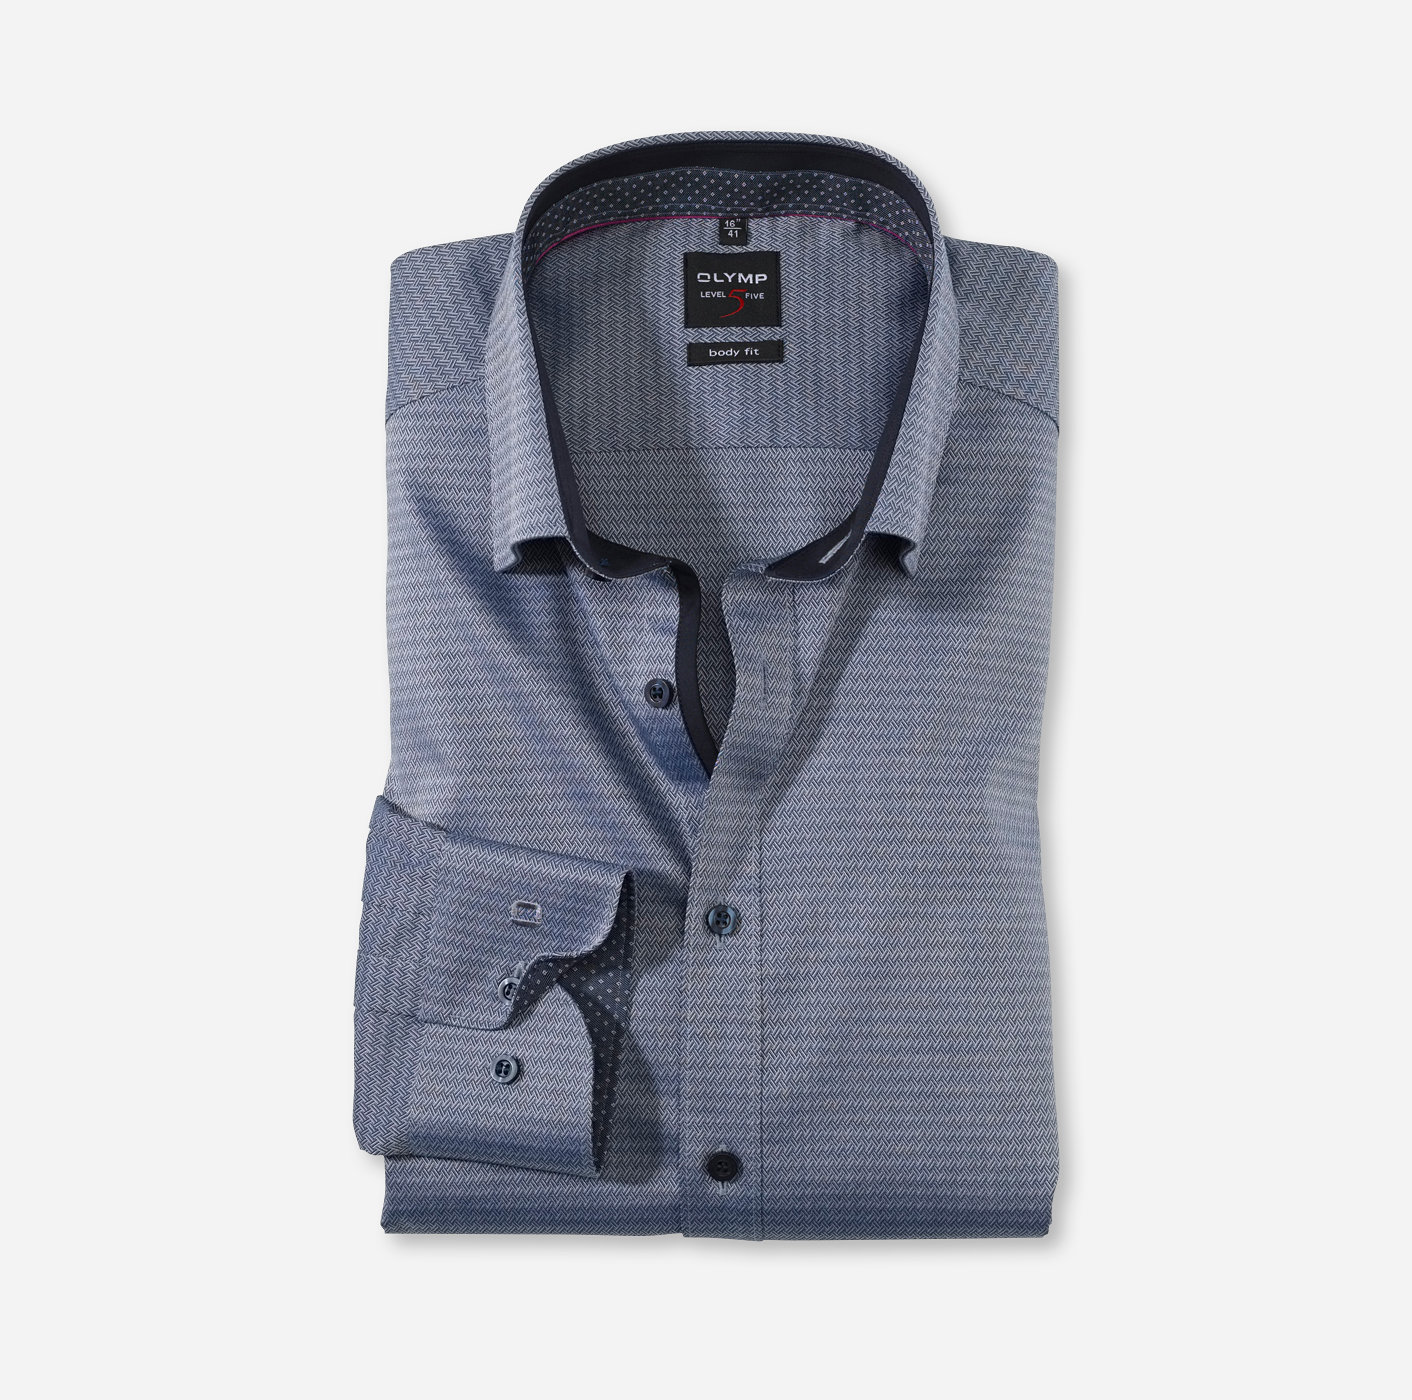 OLYMP Level Five, body fit, Businesshemd, Under-Button-down, Marine